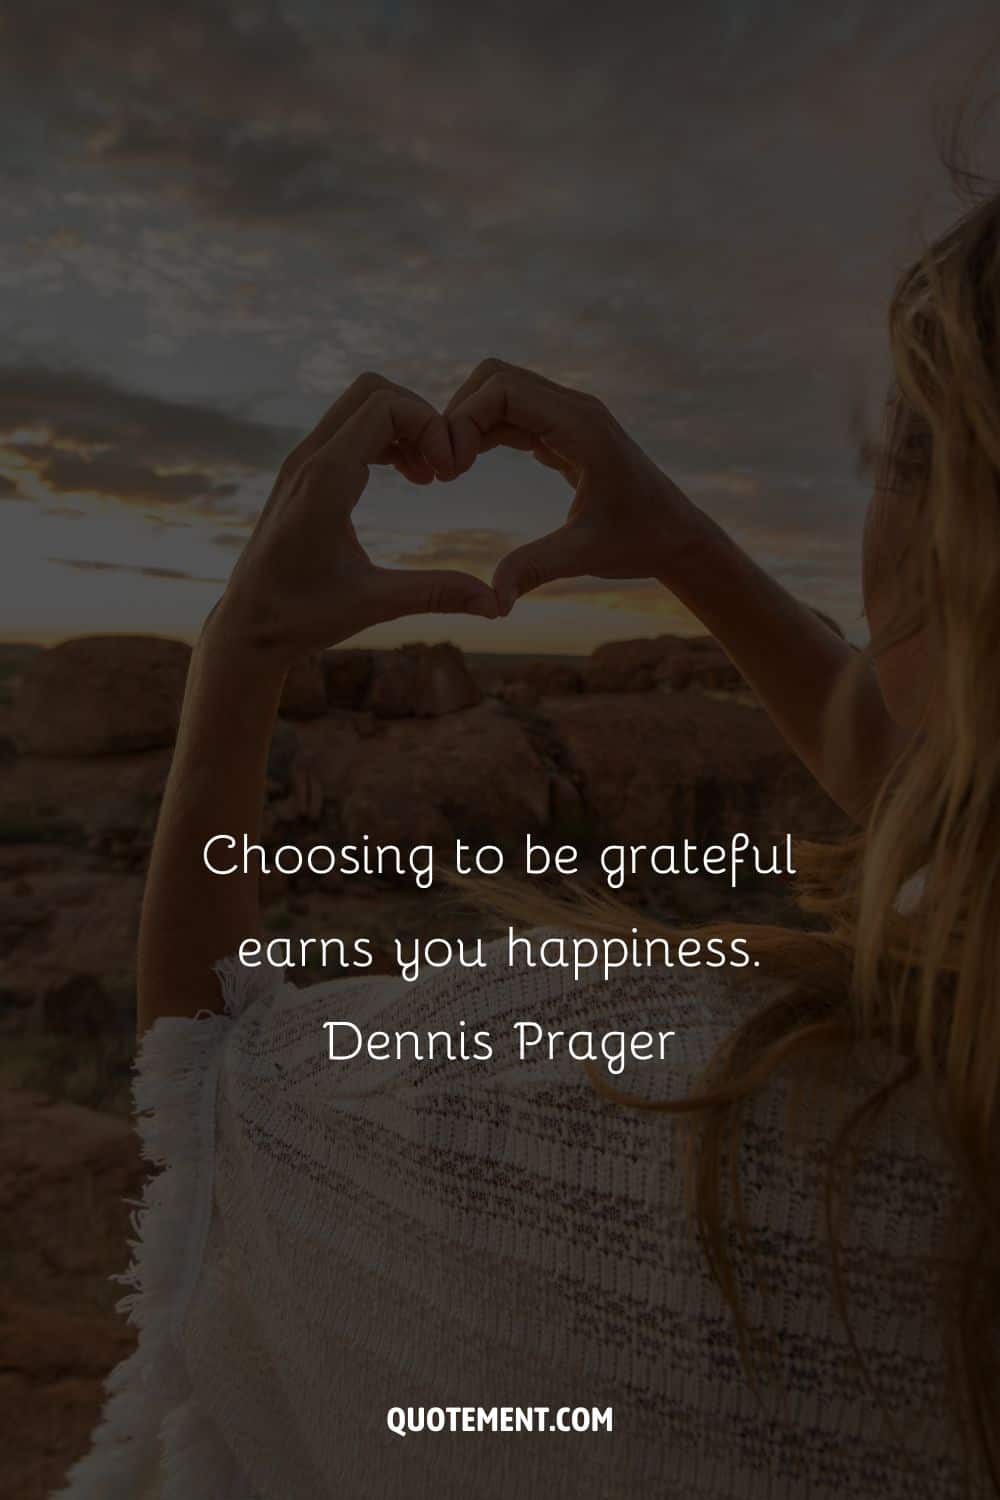 Choosing to be grateful earns you happiness.